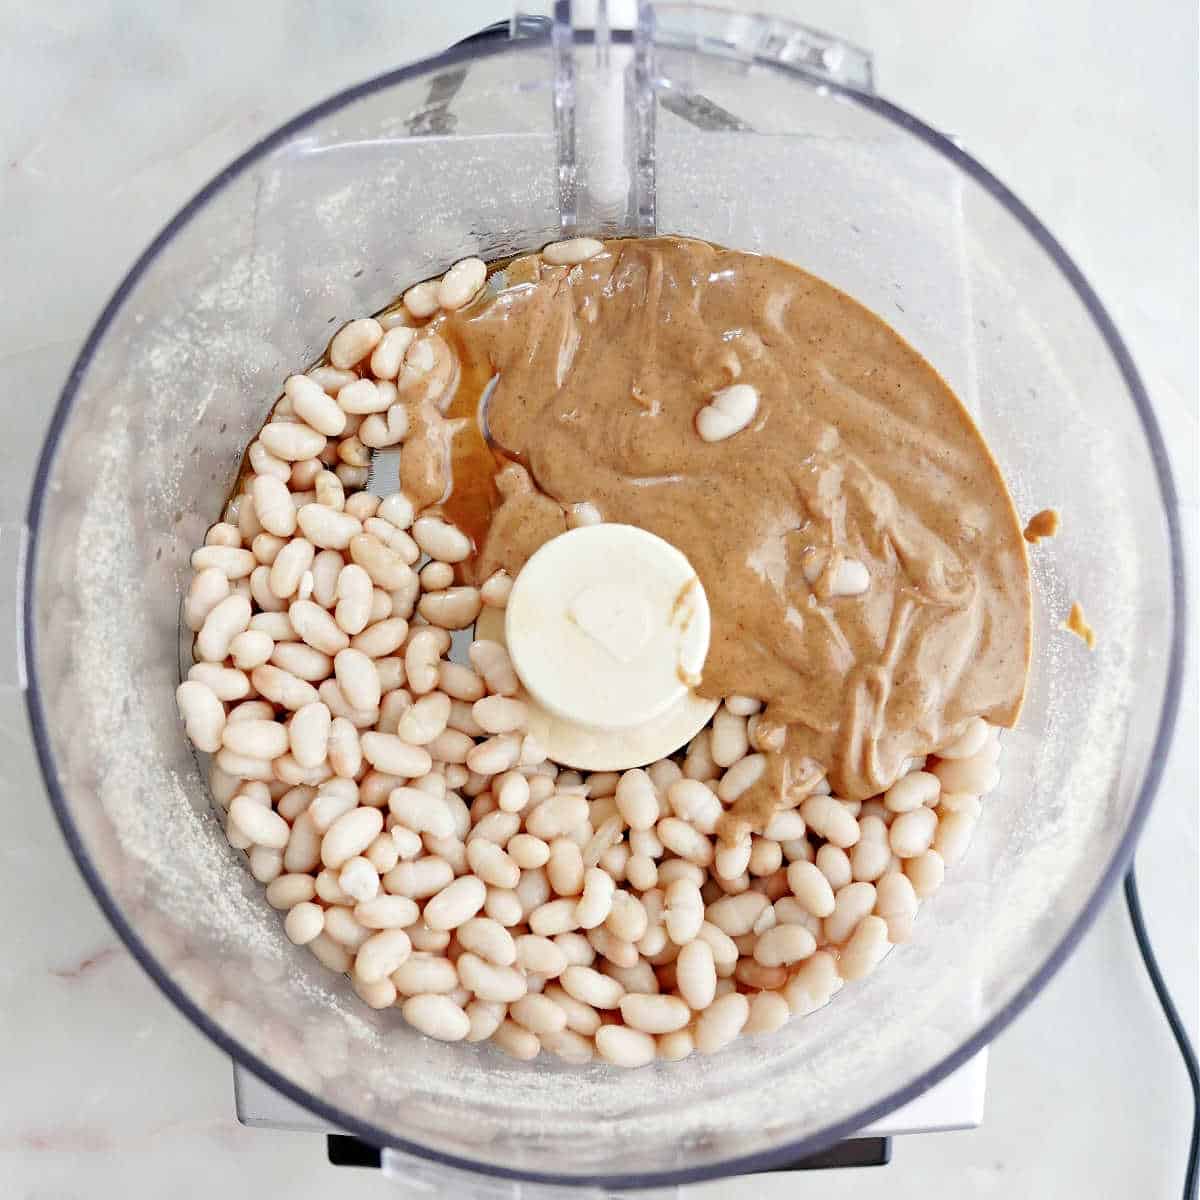 beans, peanut butter, maple syrup, and vanilla before being blended in a food processor